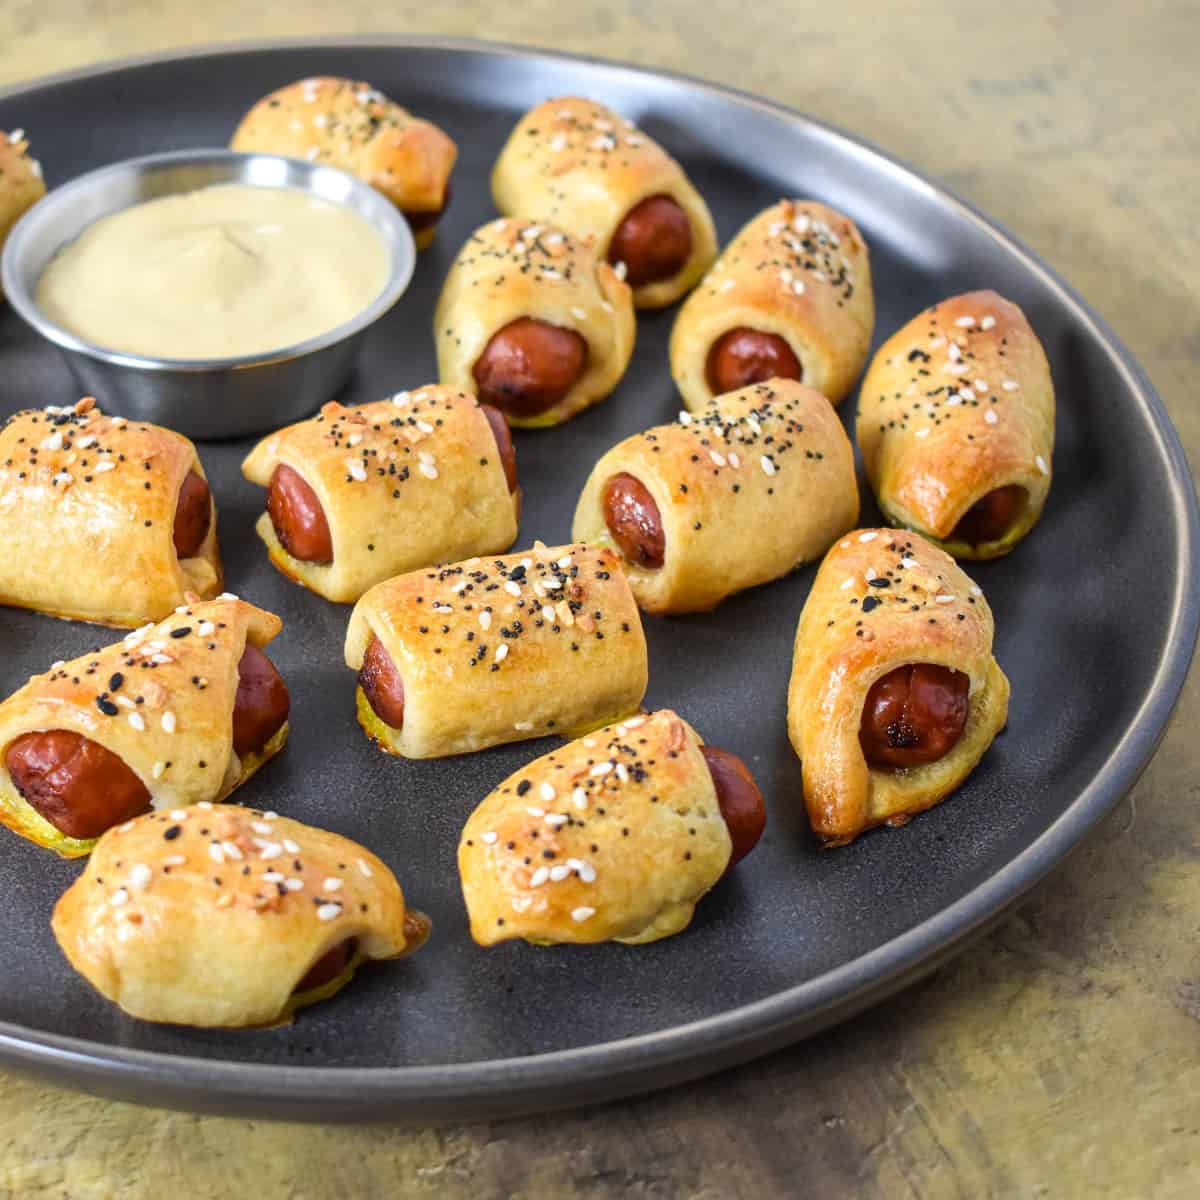 The pigs in a blanket arranged on a gray platter served with a side of mustard.